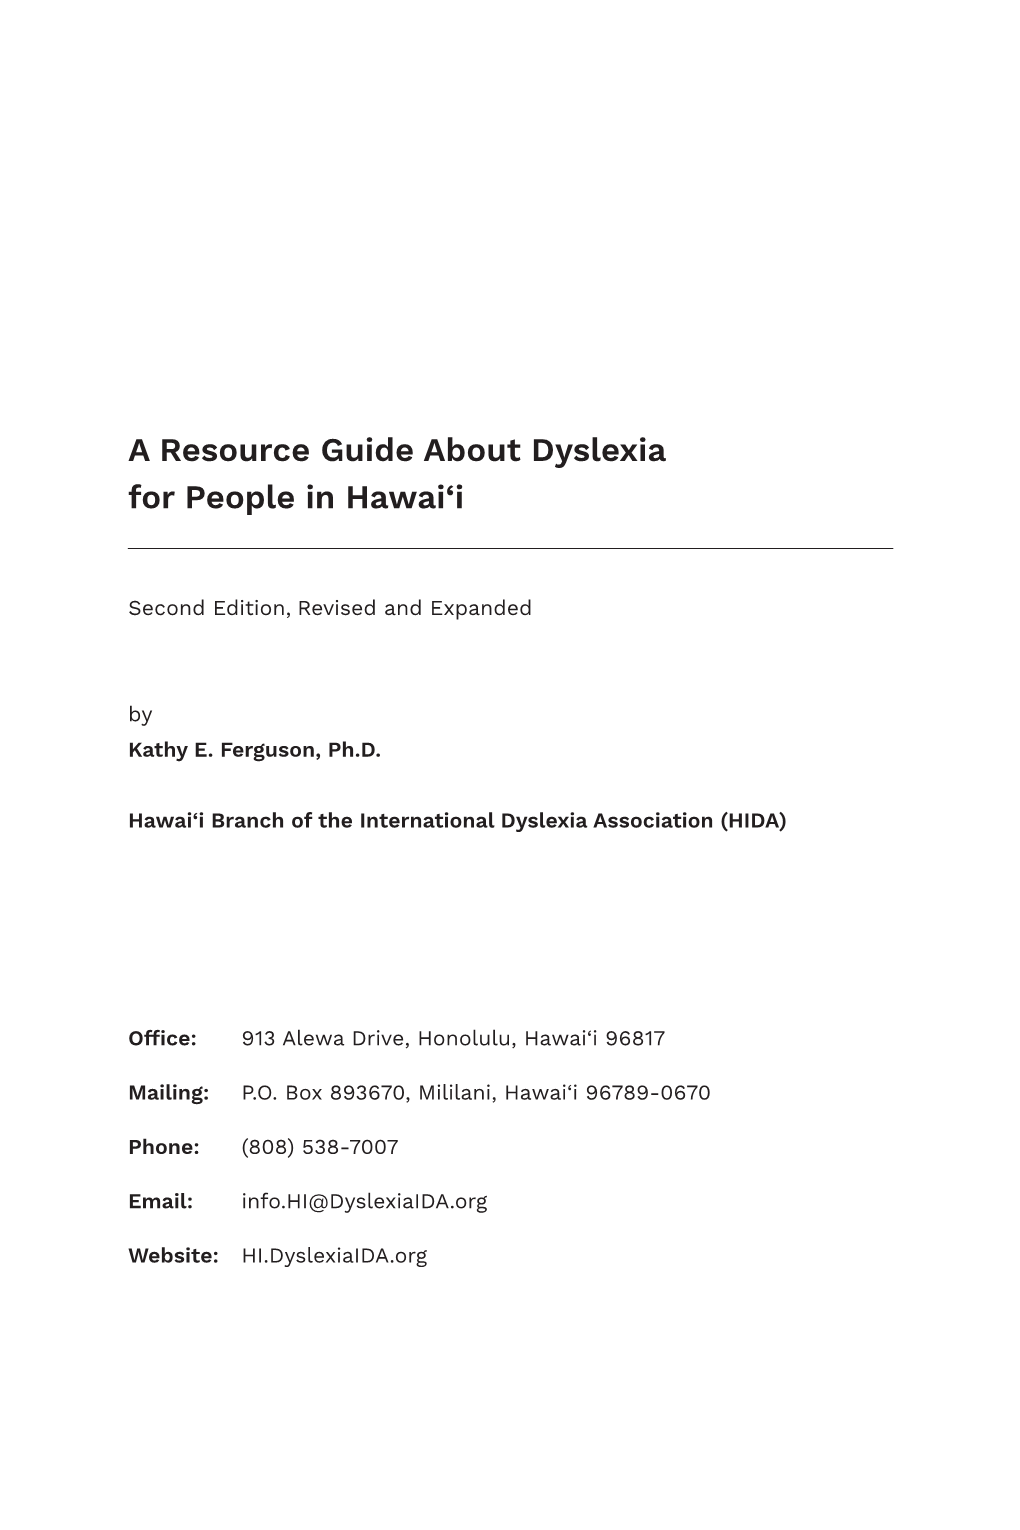 A Resource Guide About Dyslexia for People in Hawai'i